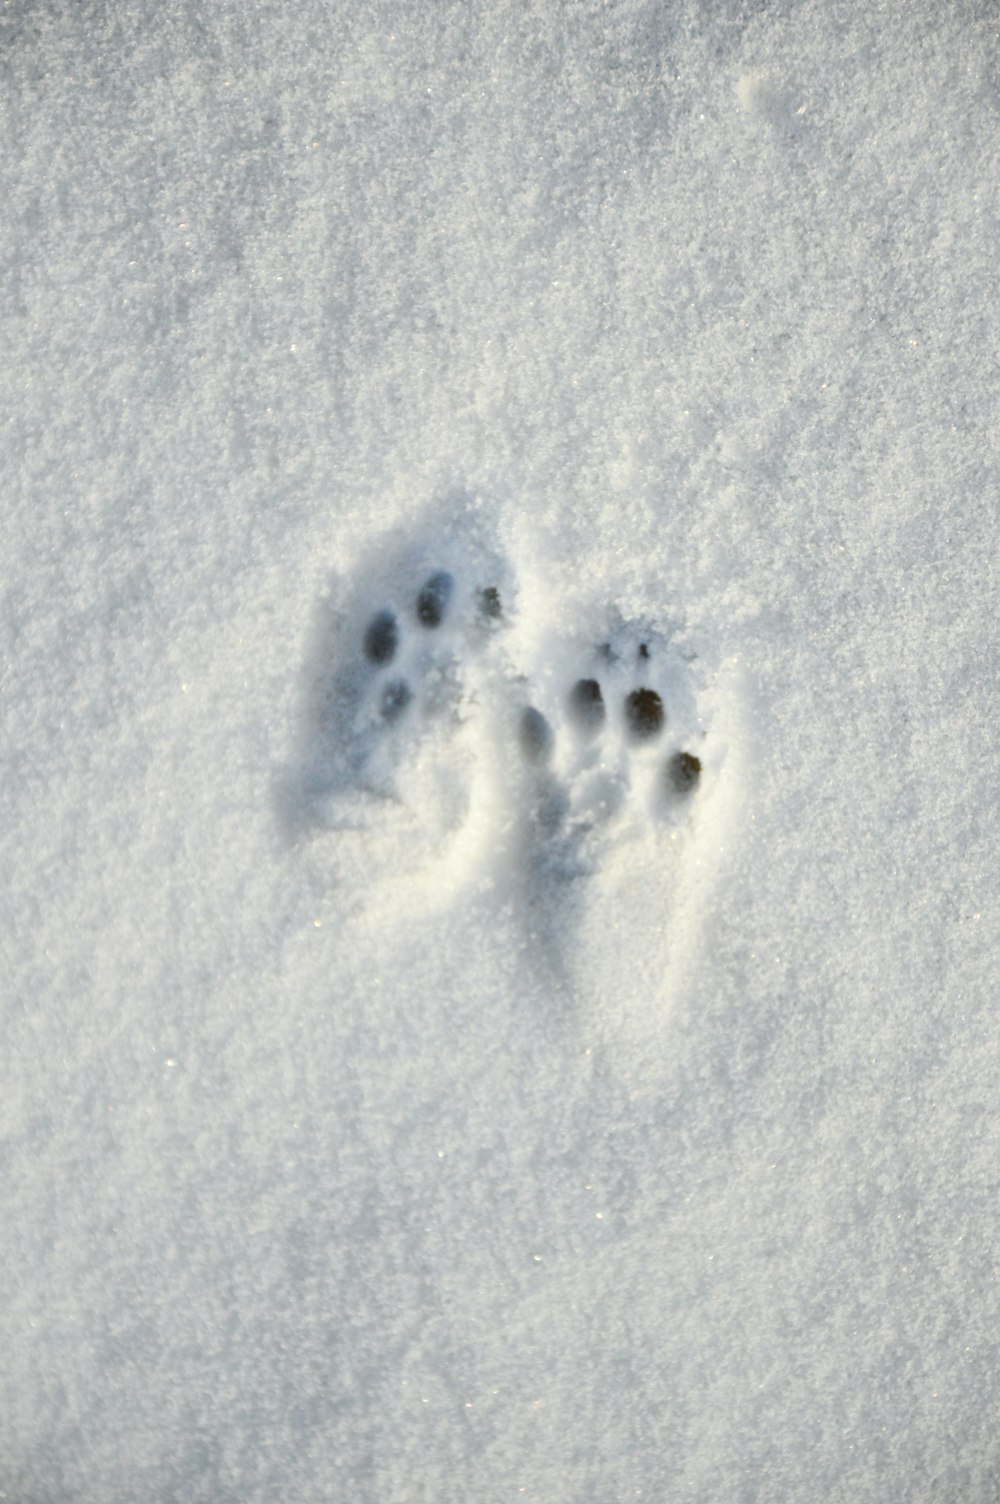 a small animal's paw prints in the snow